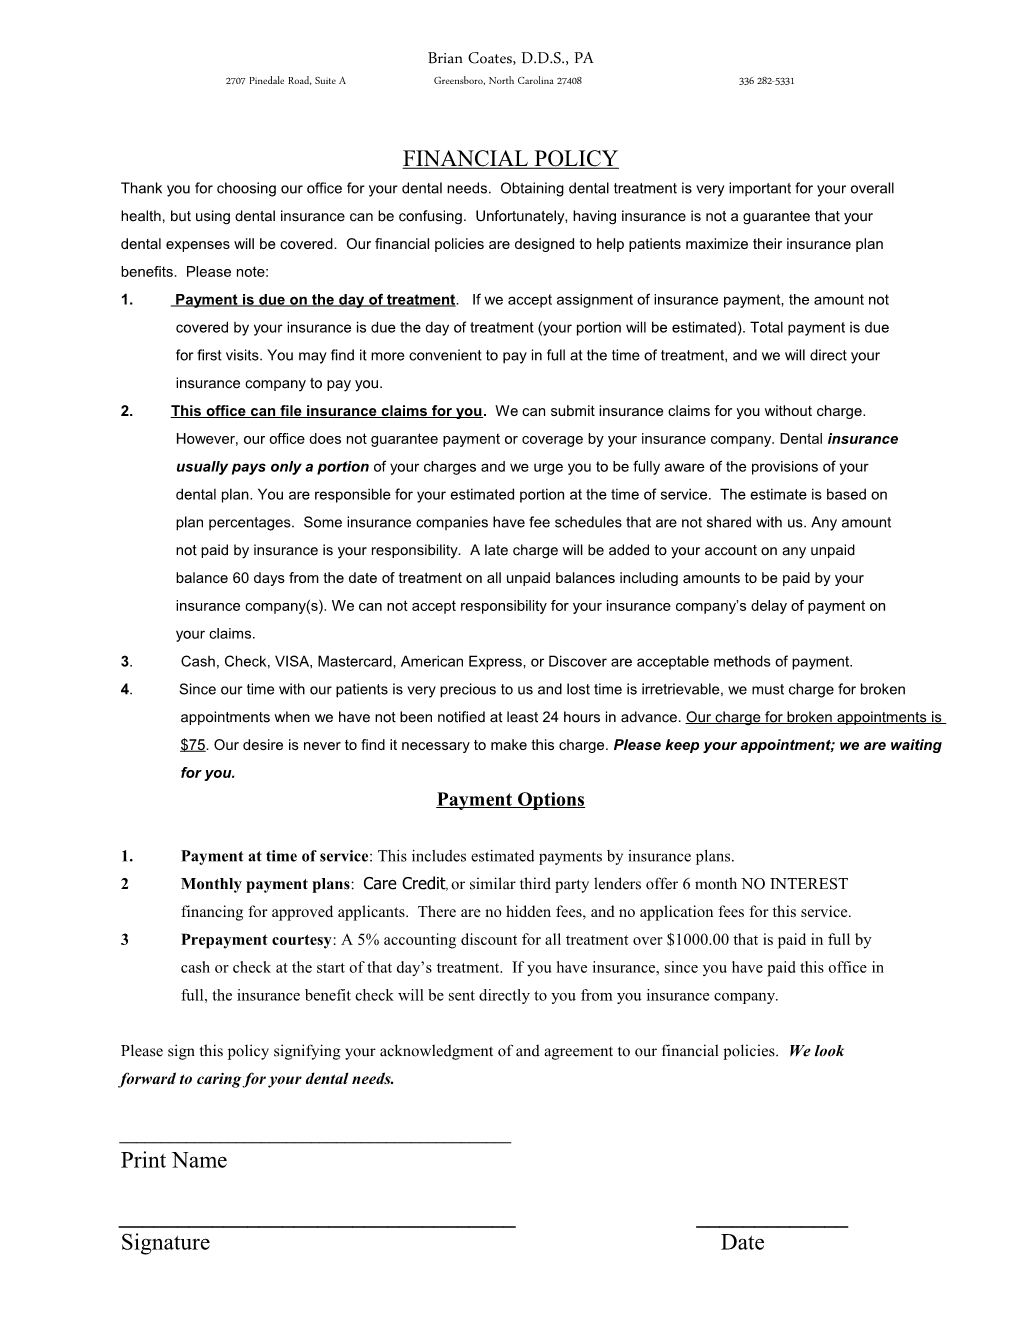 Financial Policy Page 2